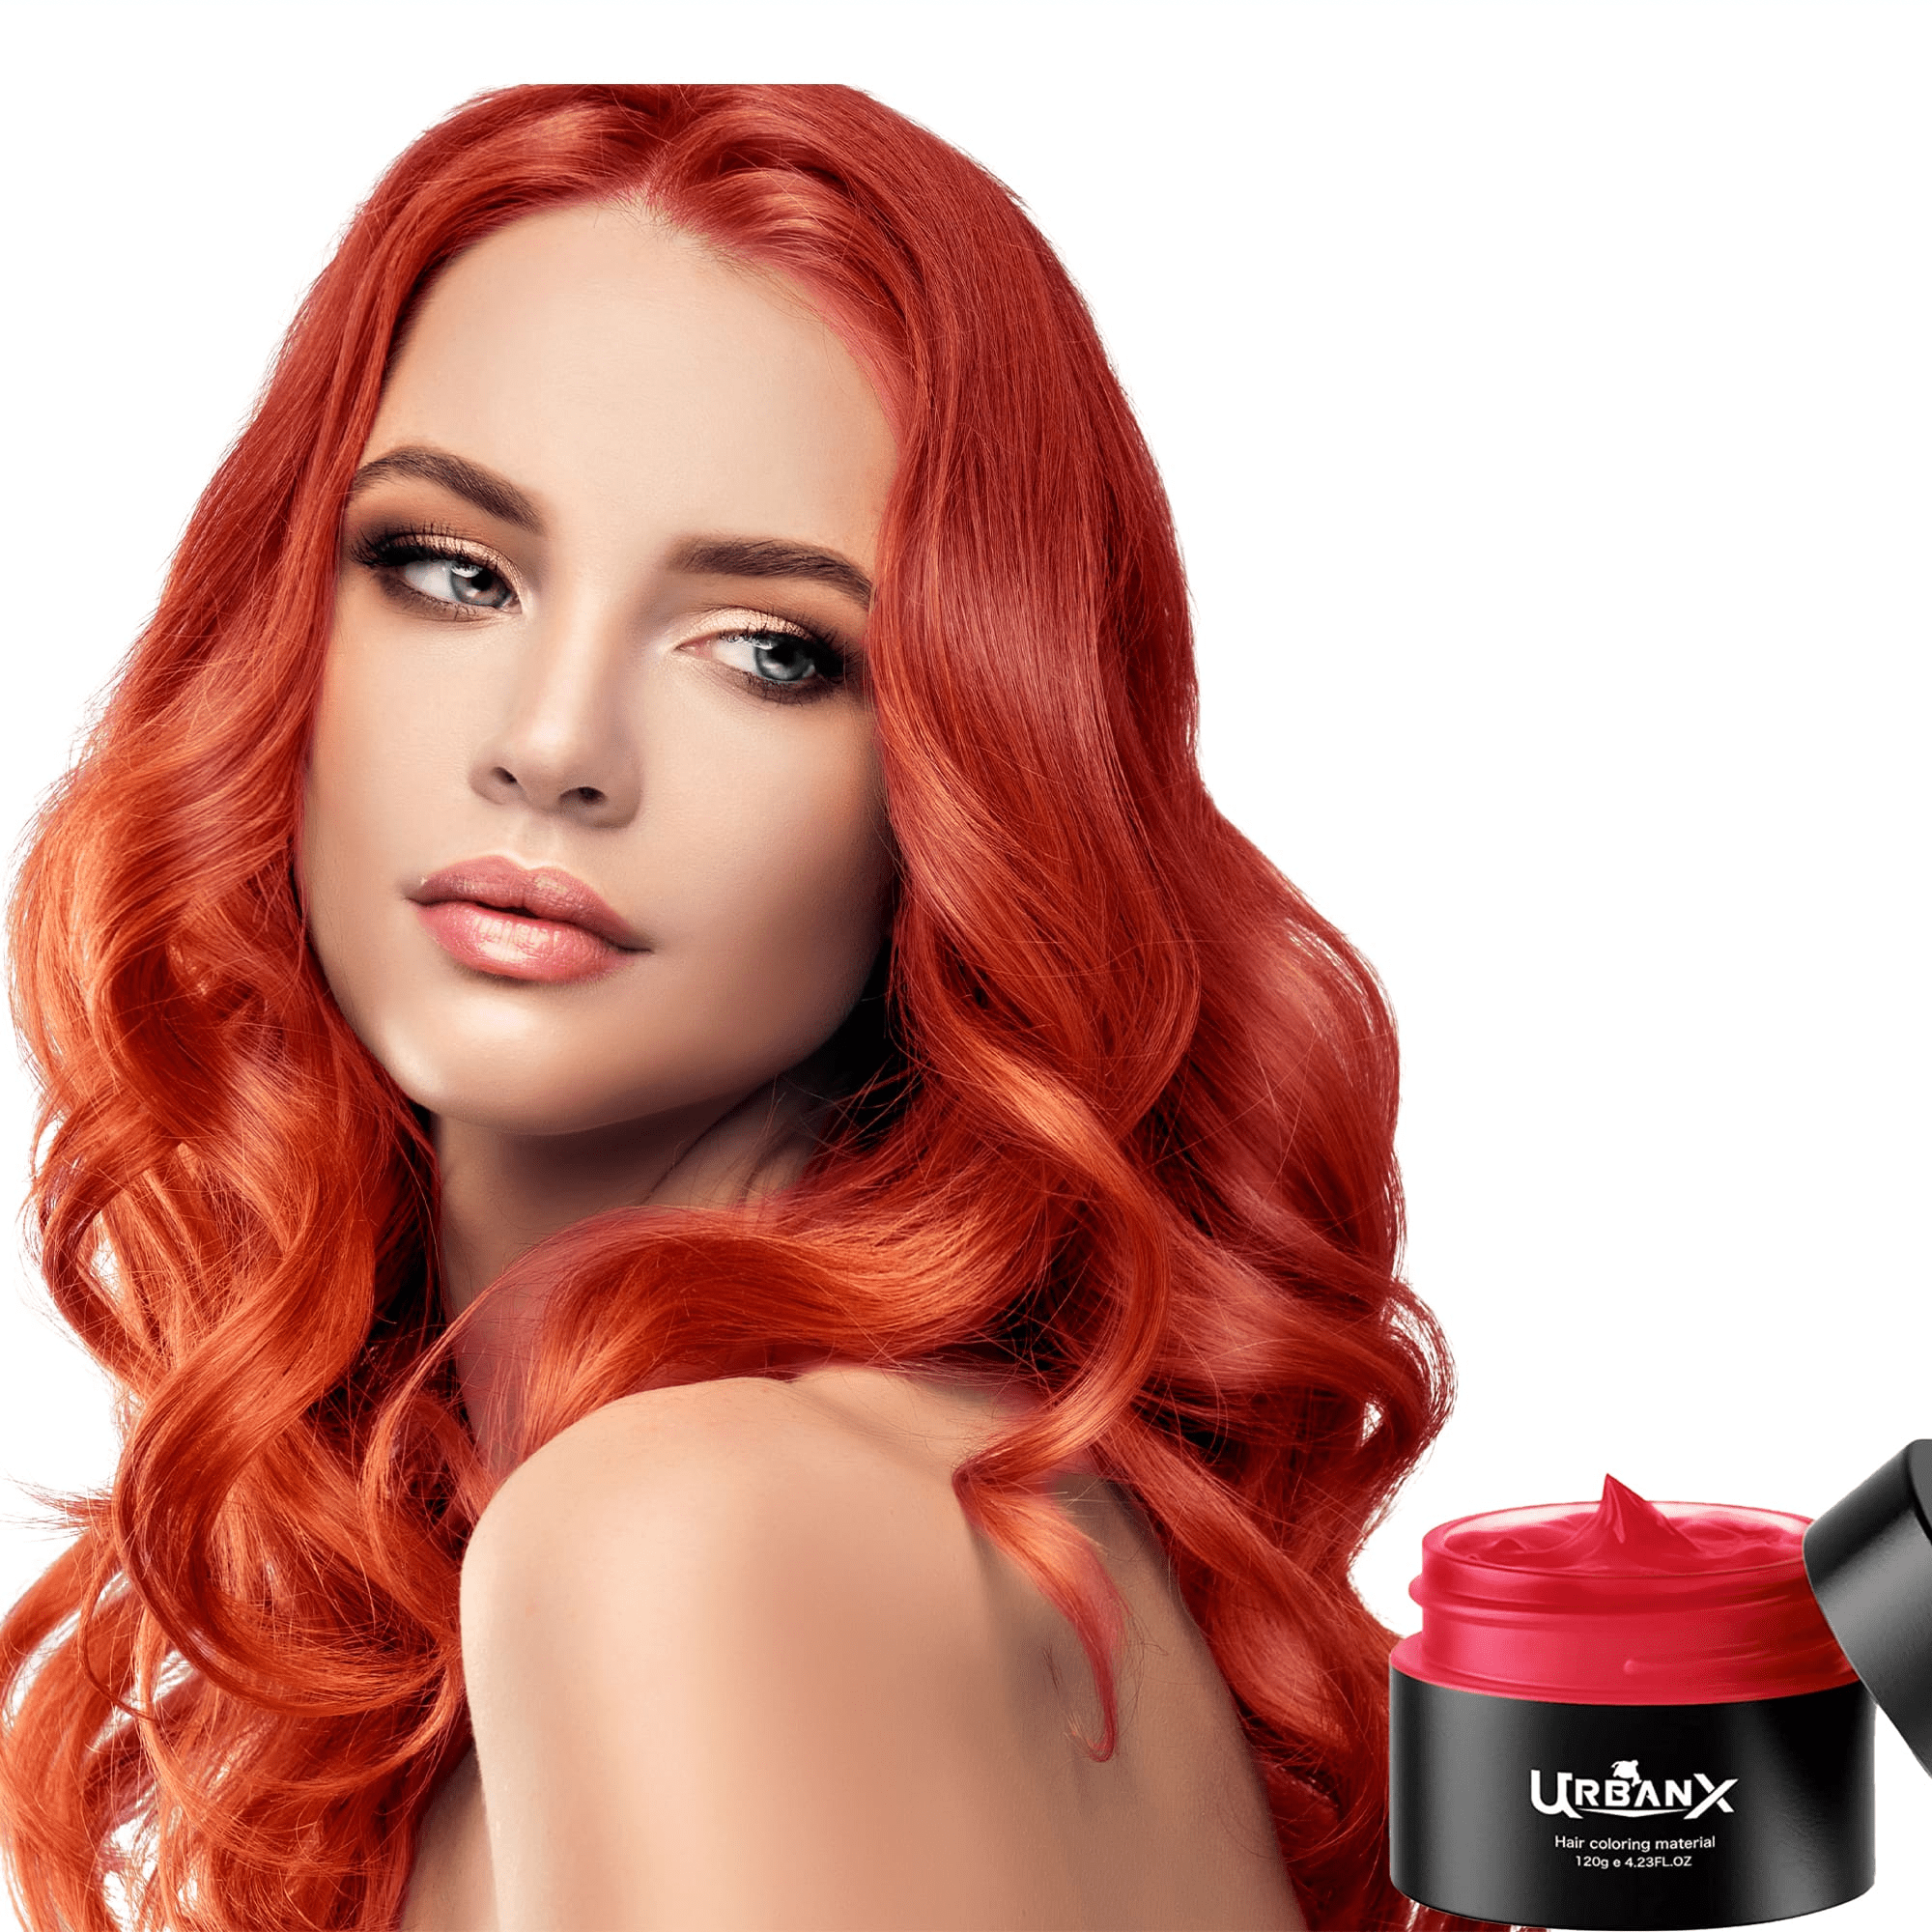 UrbanX Washable Hair Coloring Wax Material Unisex Color Dye Styling Cream  Natural Hairstyle for Curly, Wavy Hair Pomade Temporary Party Cosplay  Natural Ingredients - Red 